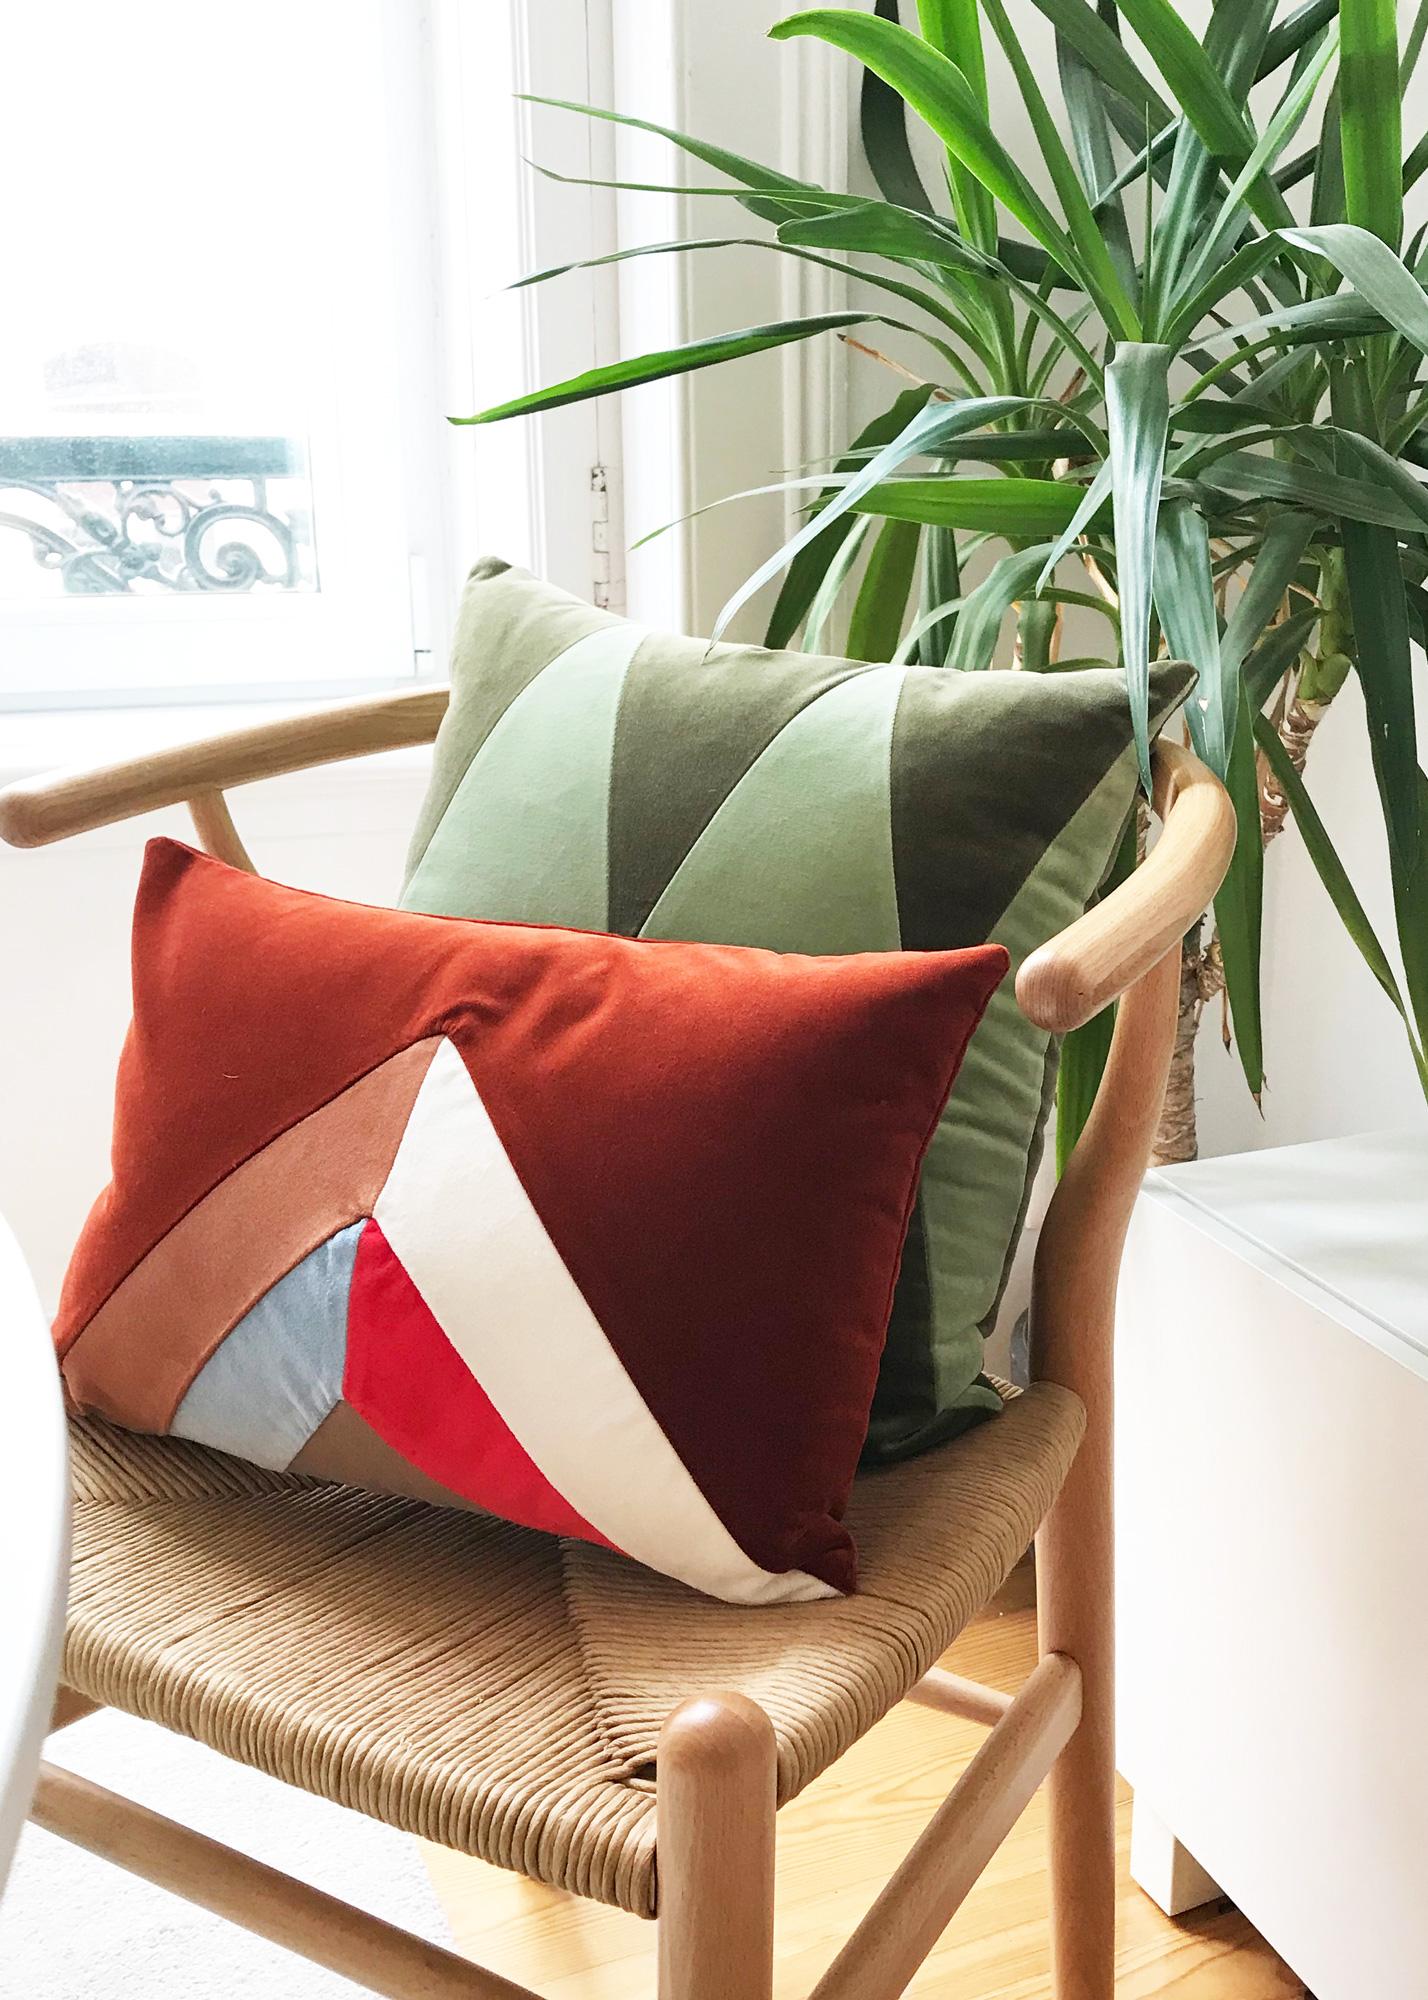 A talisman for the home of beauty, good energies and comfort. 
This decorative pillow is ethically produced by small family run business, handmade by skilled portuguese artisans with top quality cotton velvet. Each piece is unique.

Designed to